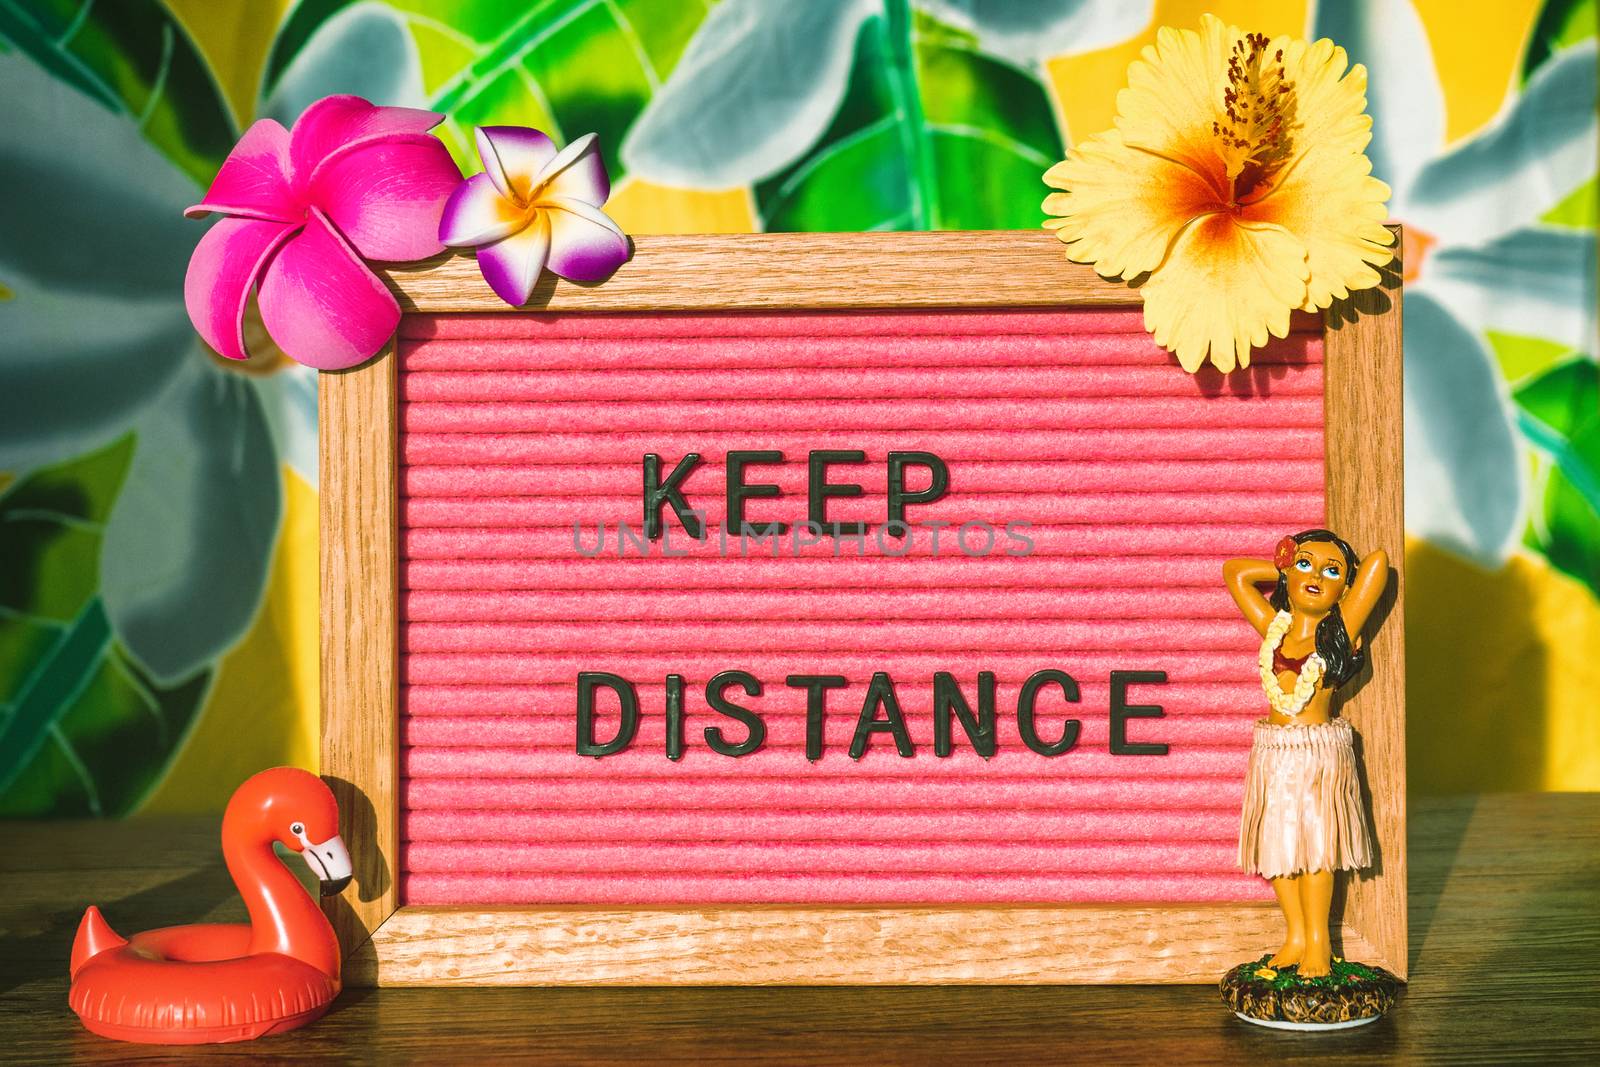 KEEP DISTANCE Covid-19 social distancing text sign for outdoor lifestyle people during summer. CORONAVIRUS concept. Tropical flowers felt board with hula dancer doll and pool float by Maridav